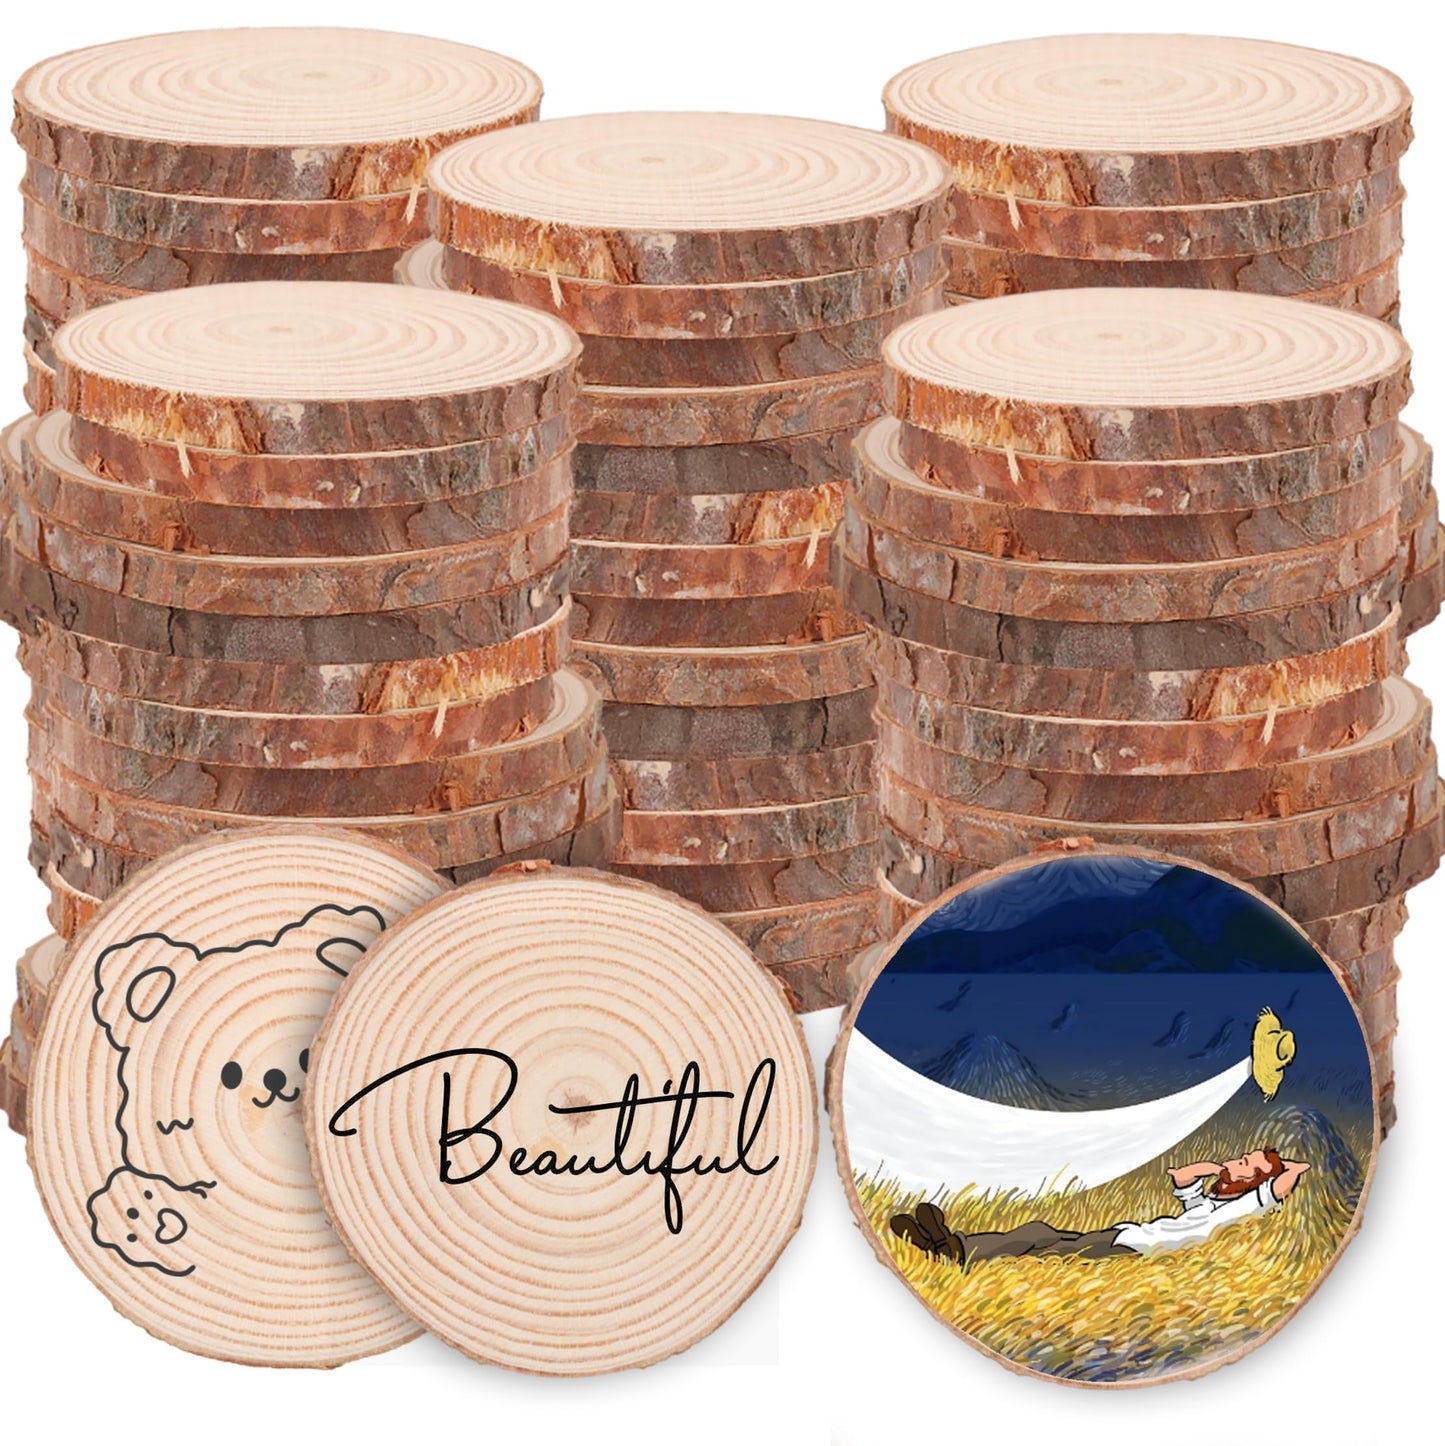 AKOLAFE 100 Pieces Natural Wood Slices 2"-2.4" Rustic Wood Slice Ornaments Unfinished Wood Tree Slices Wood Rounds Wooden Discs Pine Wood Circles for